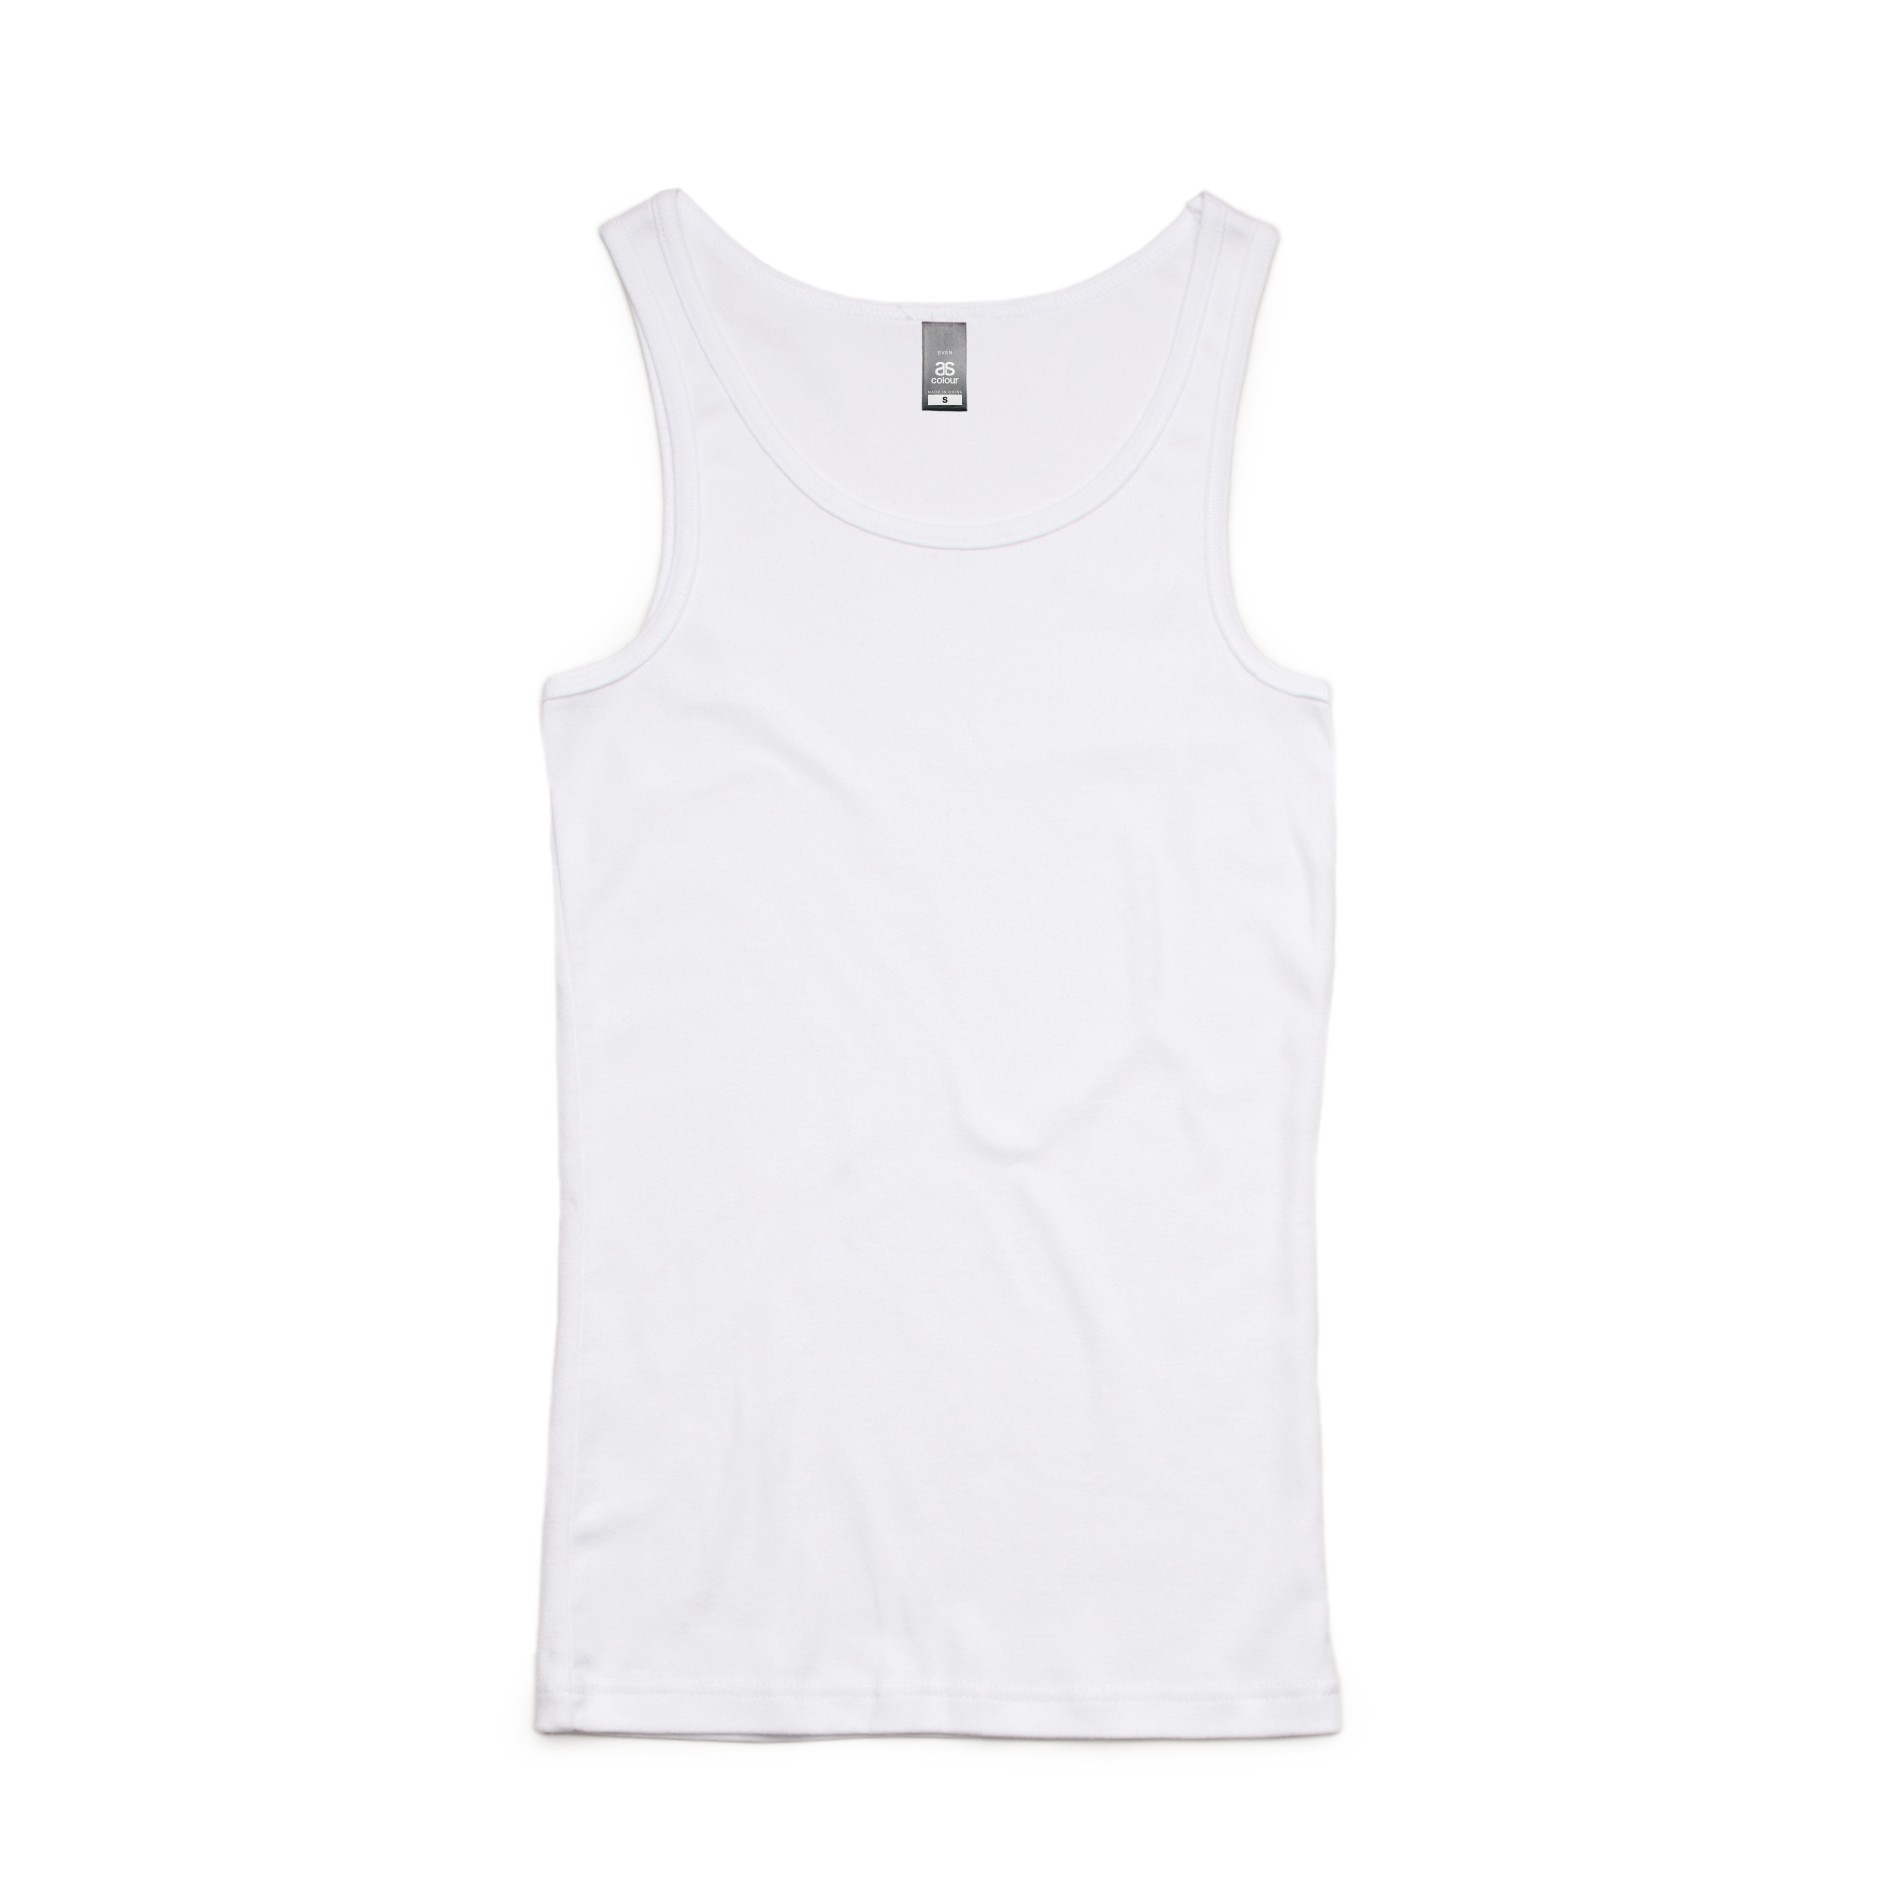 4021_even_rib_singlet_white_3 – Aprons Direct – Branded Aprons ...